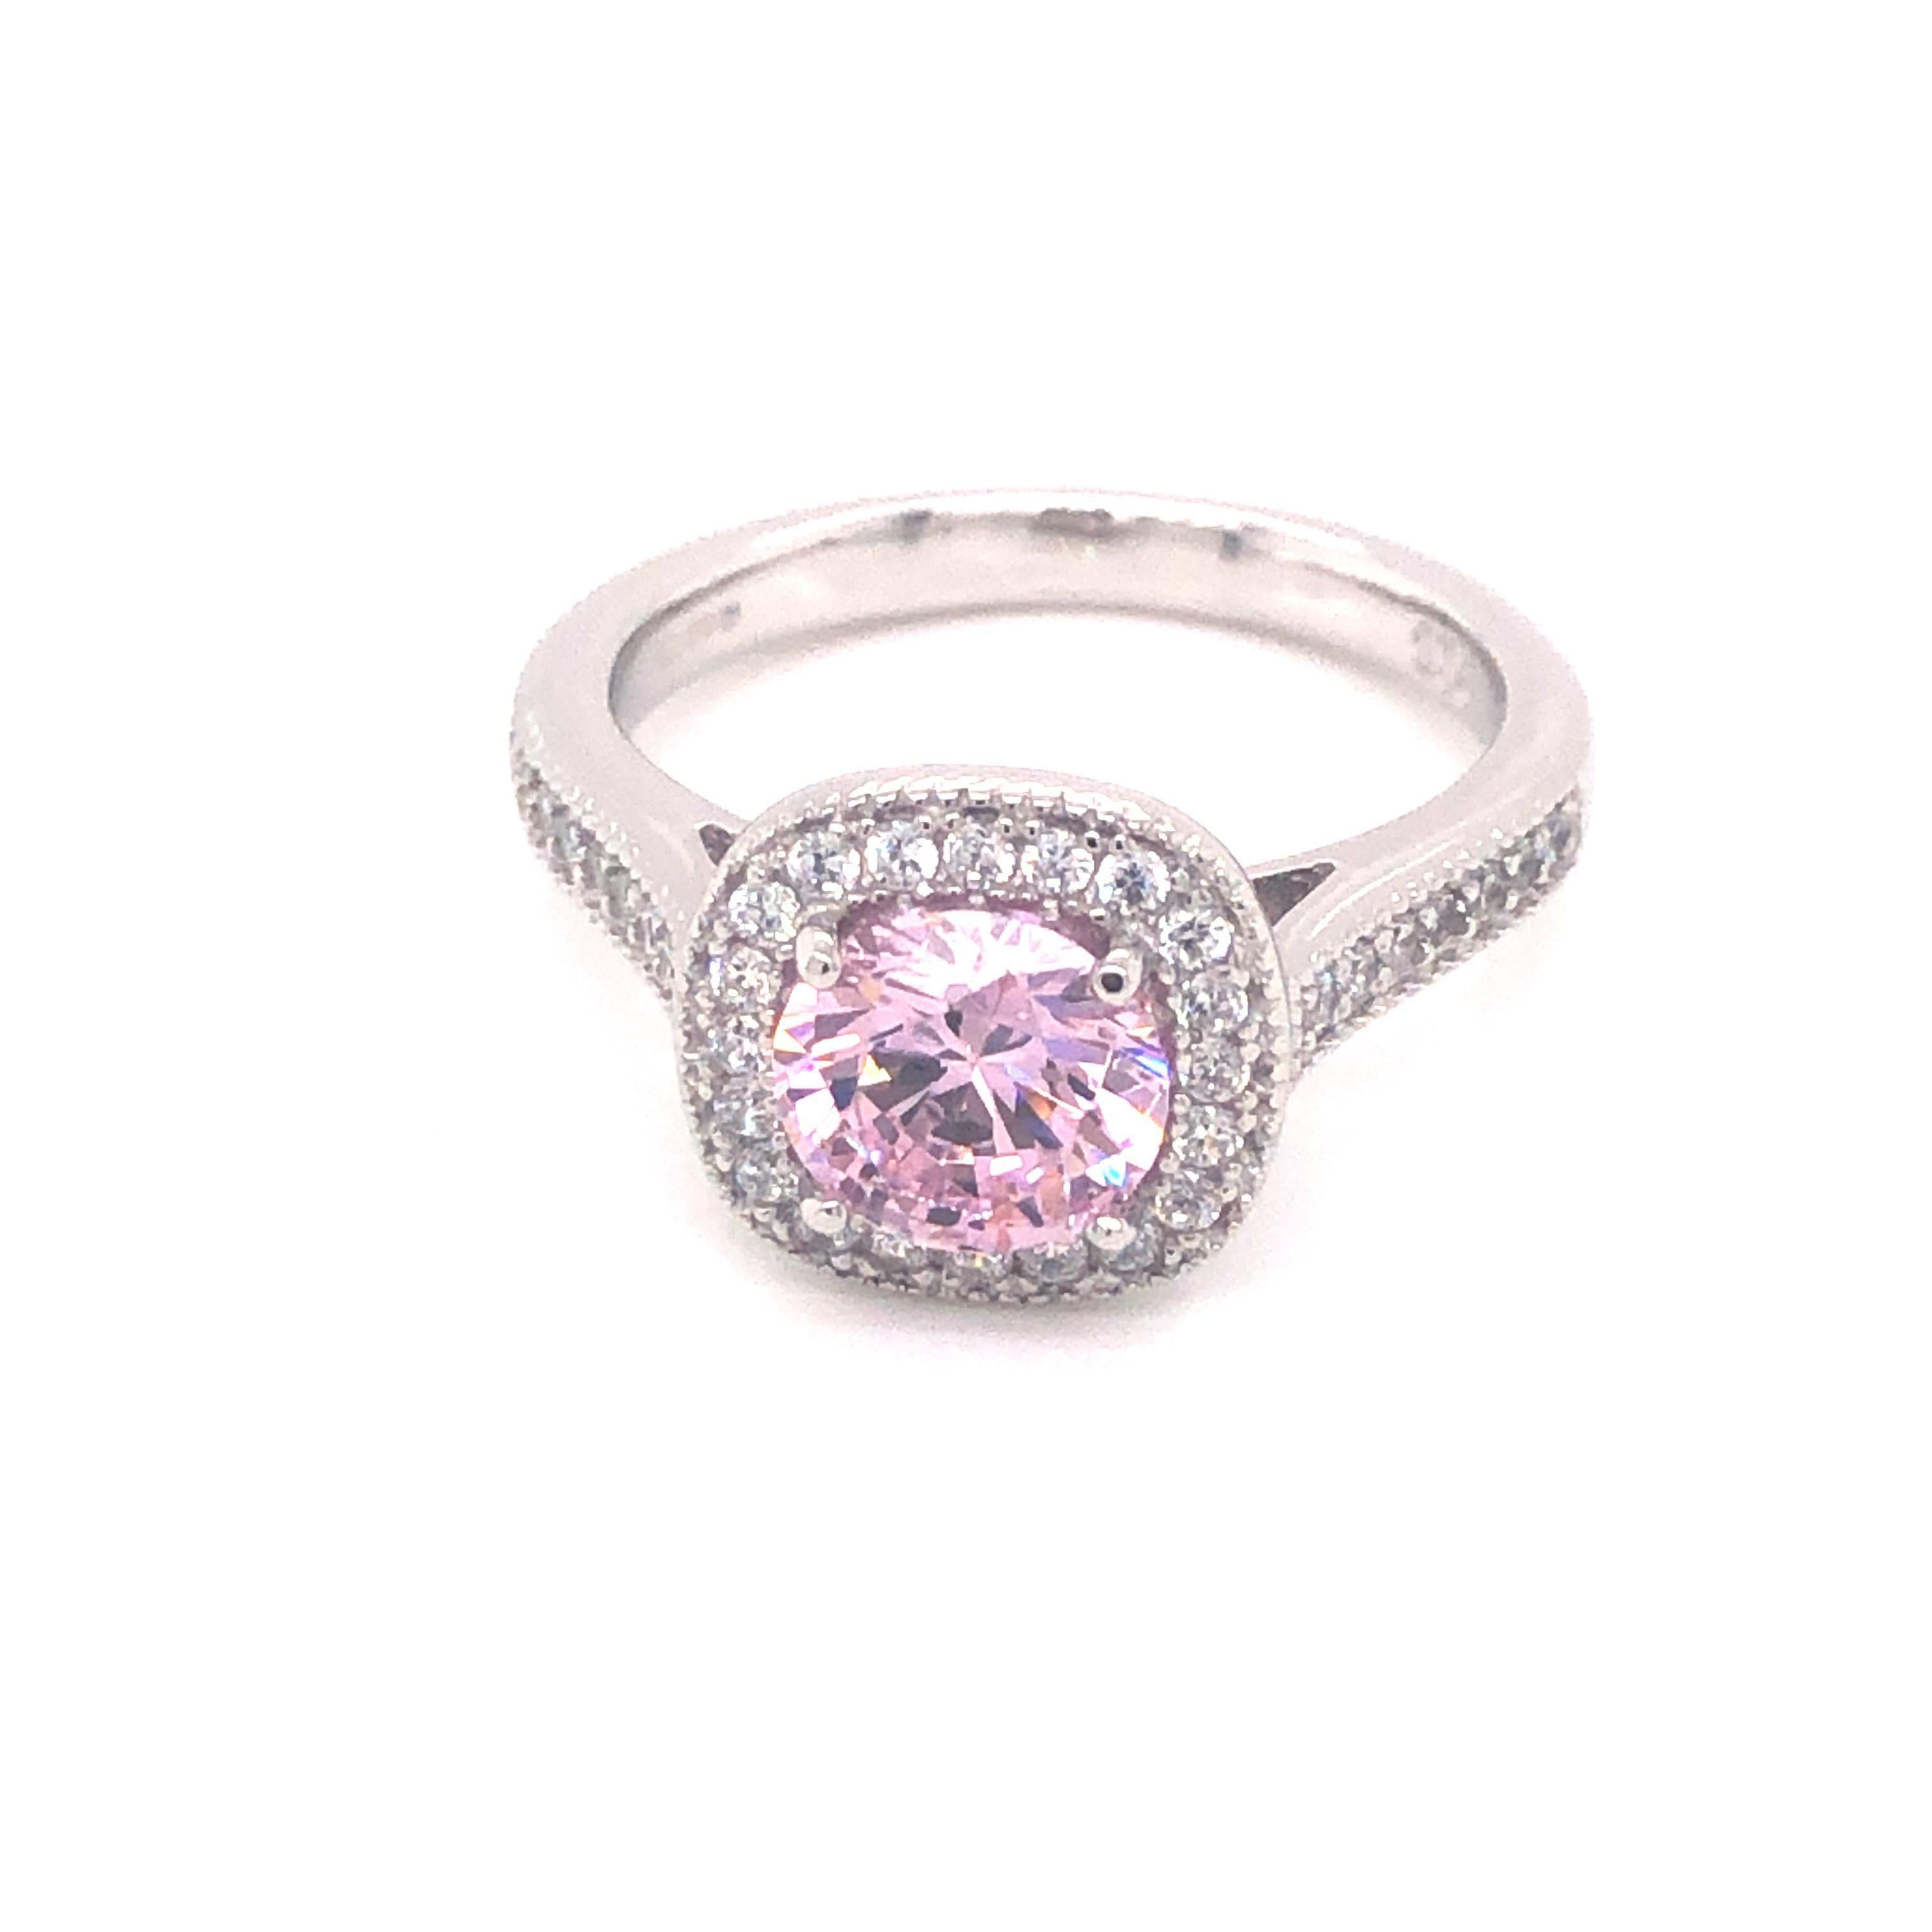 Pale pink hues radiate through this wonderfully romantic, vintage inspired design. 
Available in other sizes. 

Featuring a 1.50ct round pale pink brilliant cut cubic zirconia, surrounded by 0.34ct of smaller round brilliant cut cubic zirconia, set